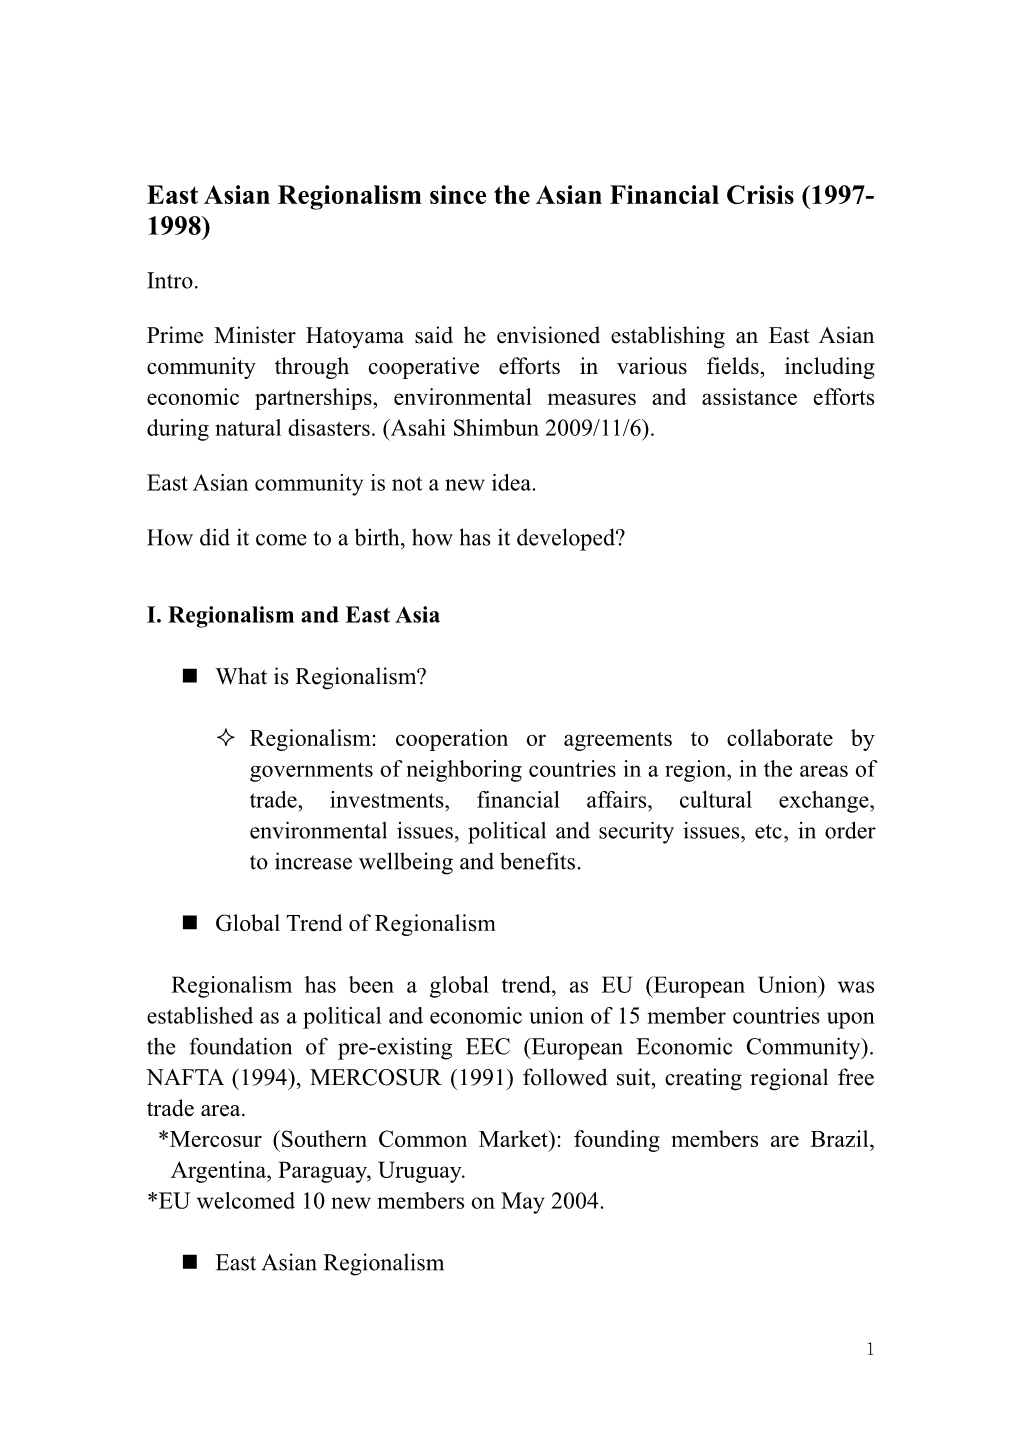 East Asian Regionalism Since the Asian Financial Crisis (1997-1998)